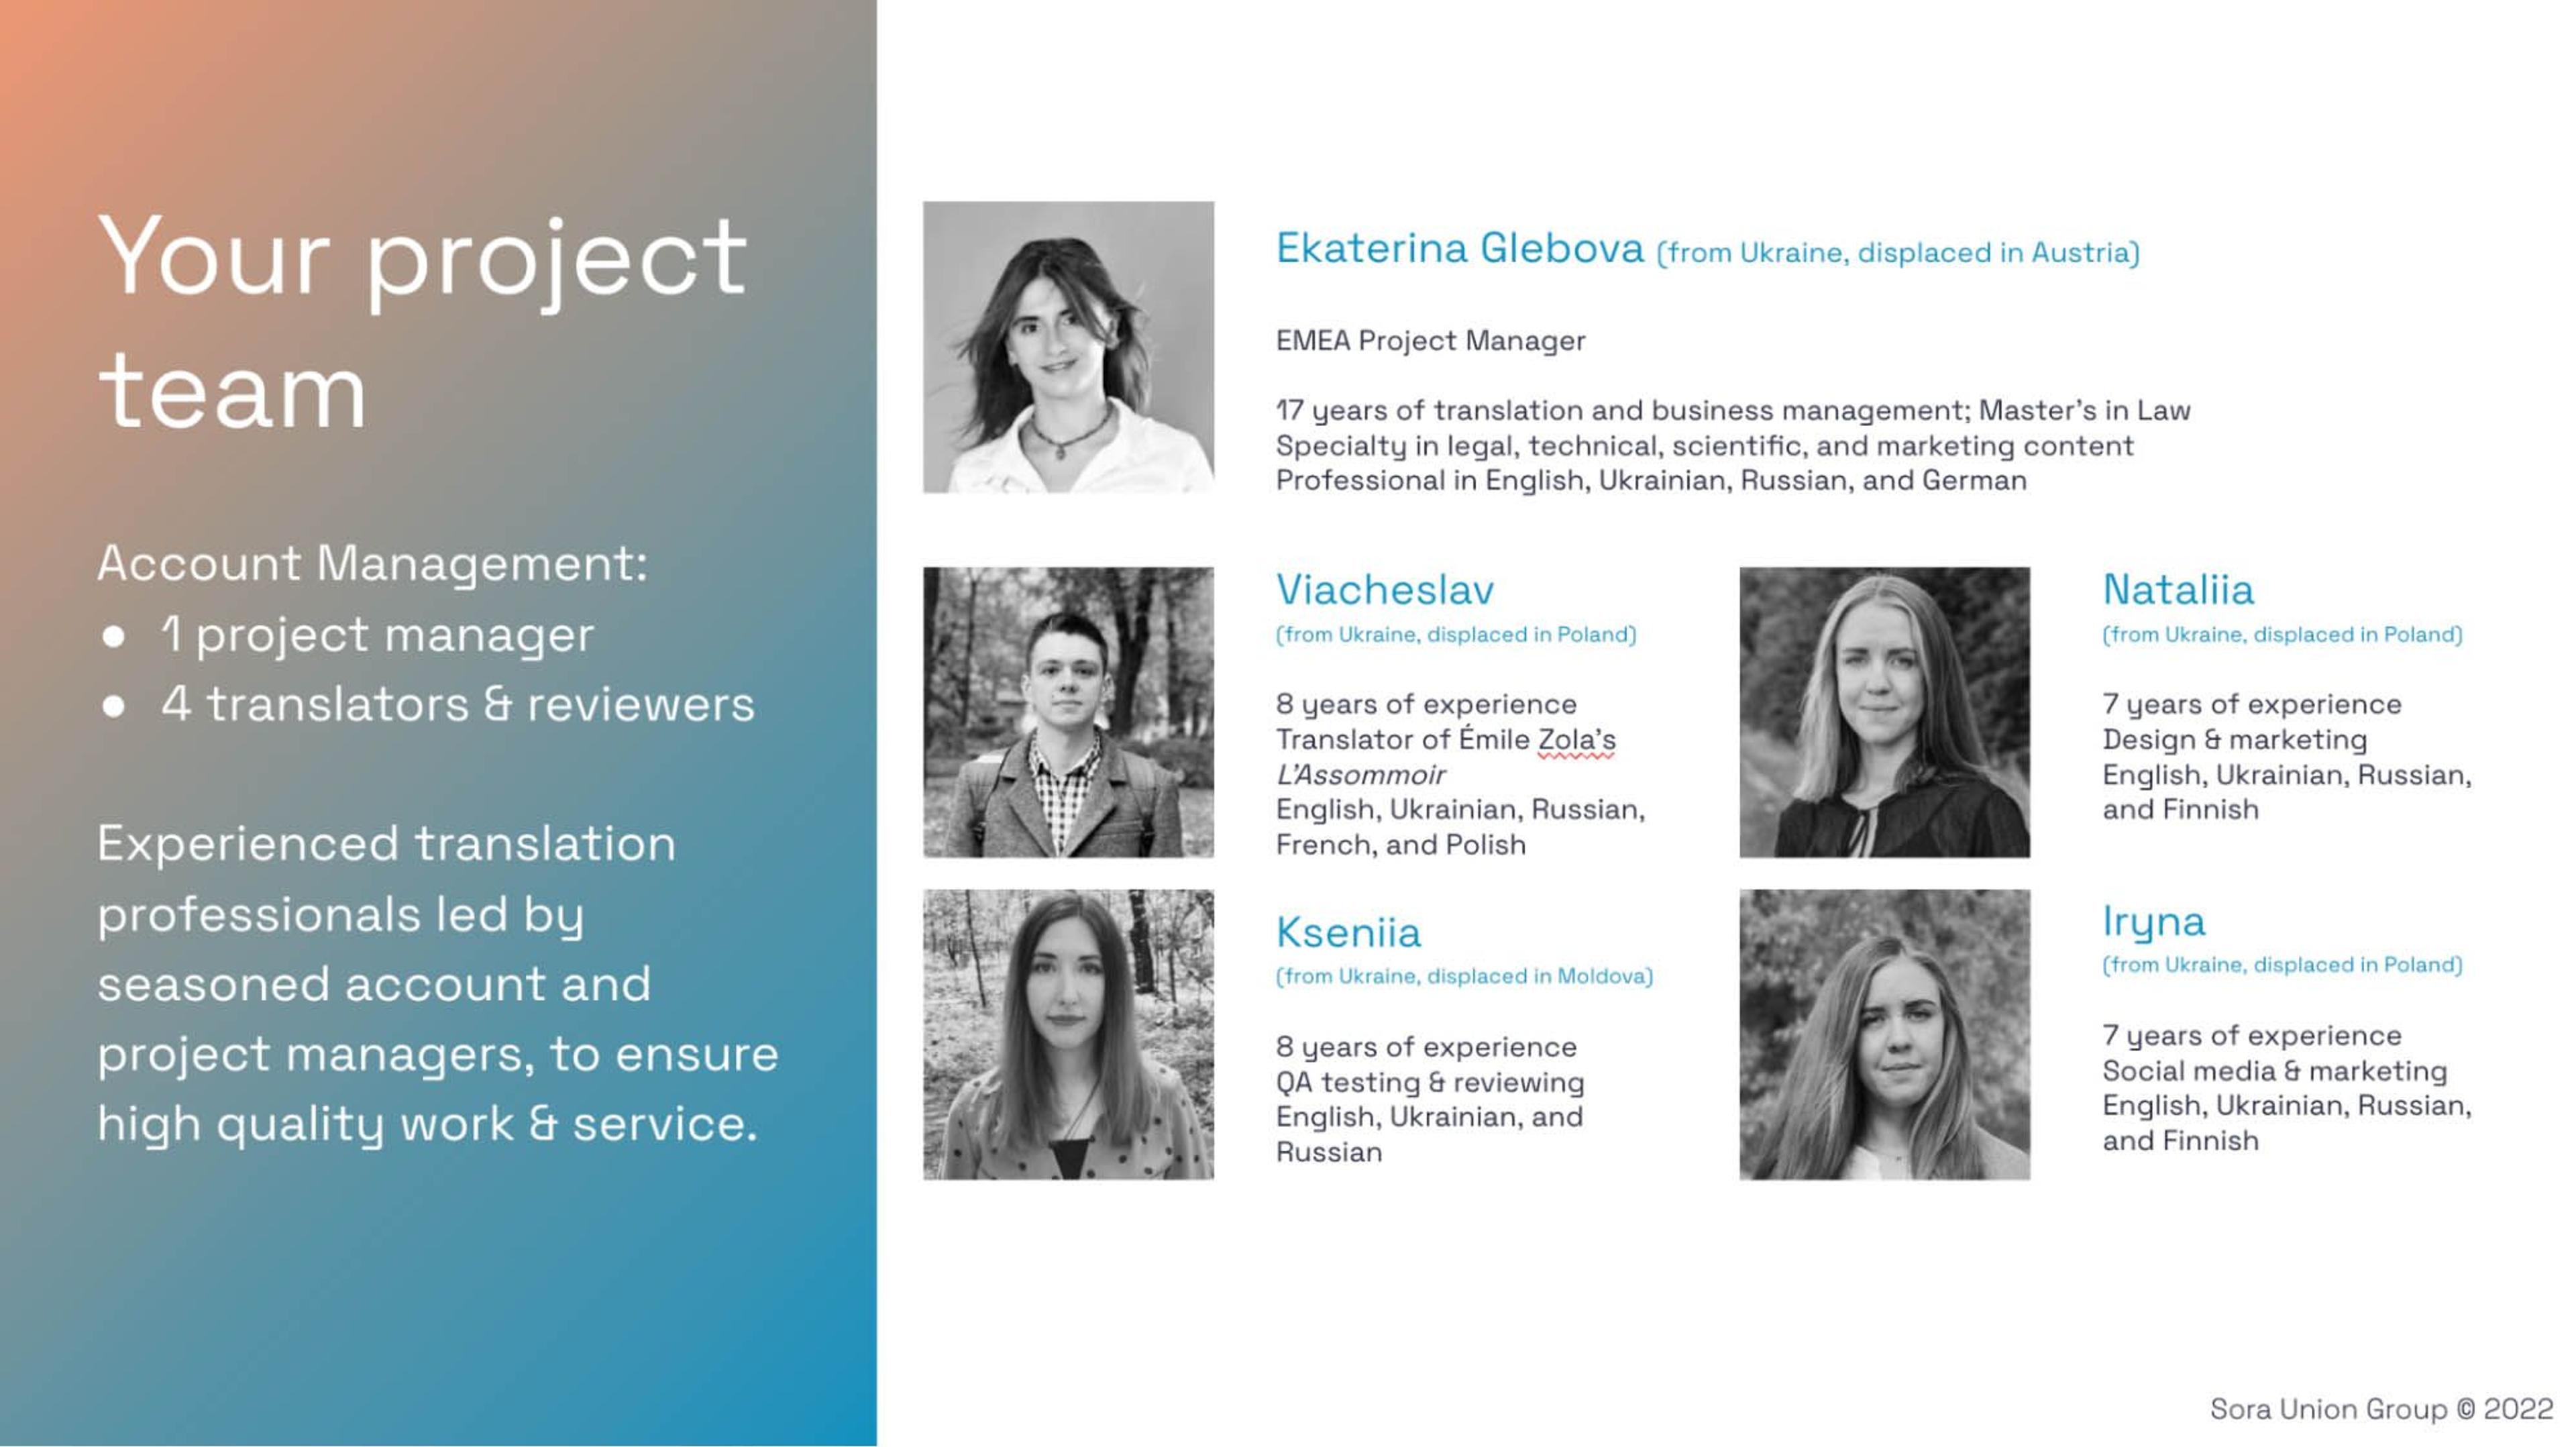 Presentation slide about project team, with 1 project manager and 4 translators and reviewers